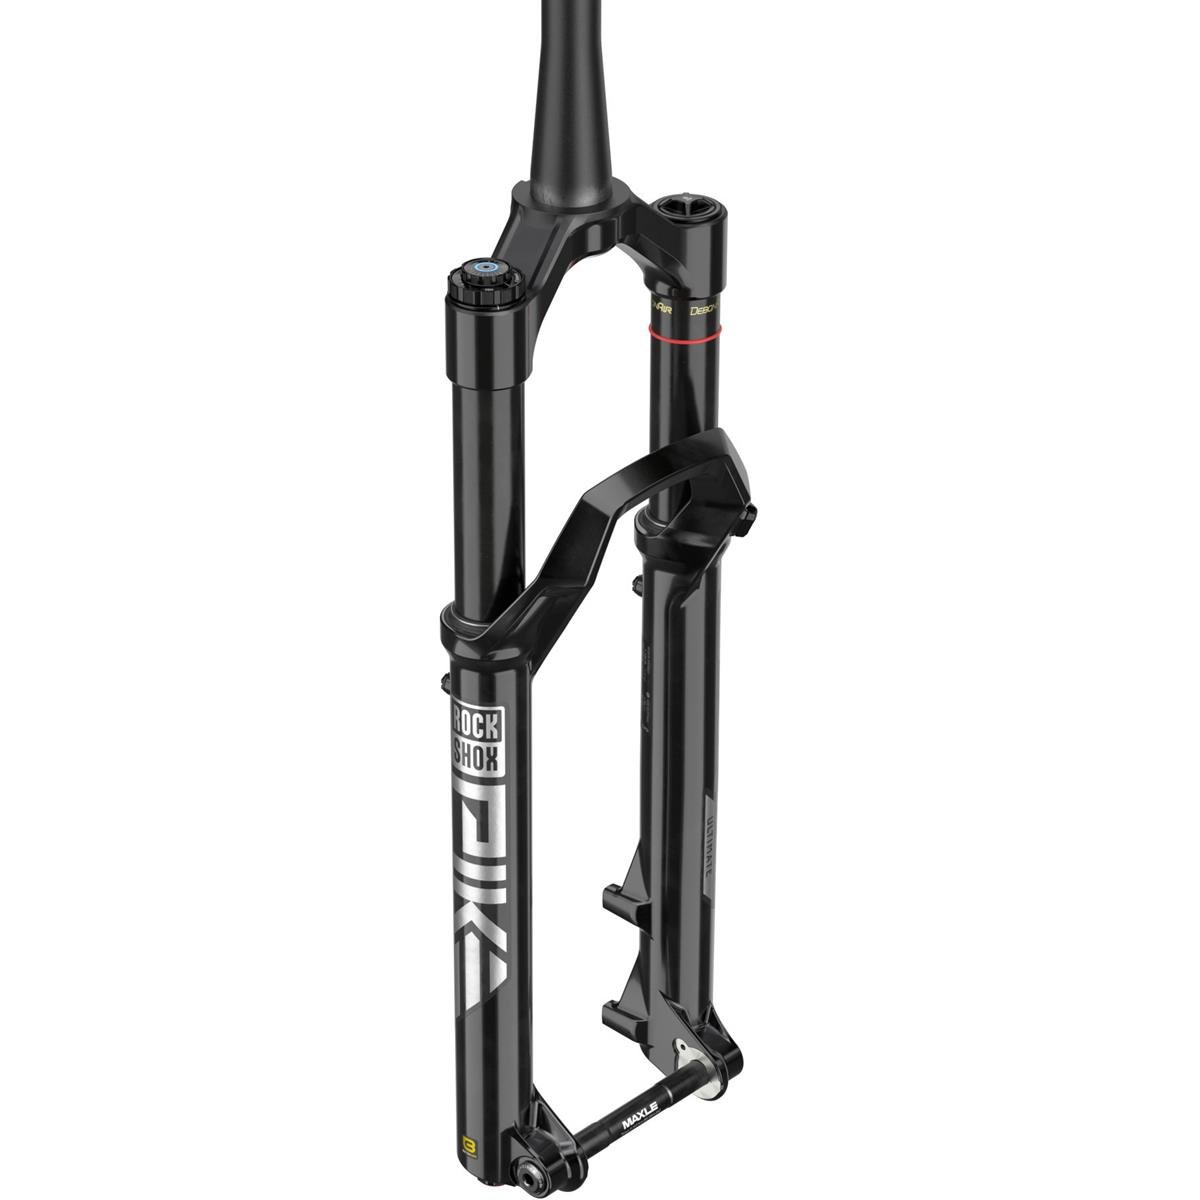 RockShox Forcella Pike Ultimate Charger 3 RC2 27.5 Pollici, 15x110 mm, Nero, 140 mm